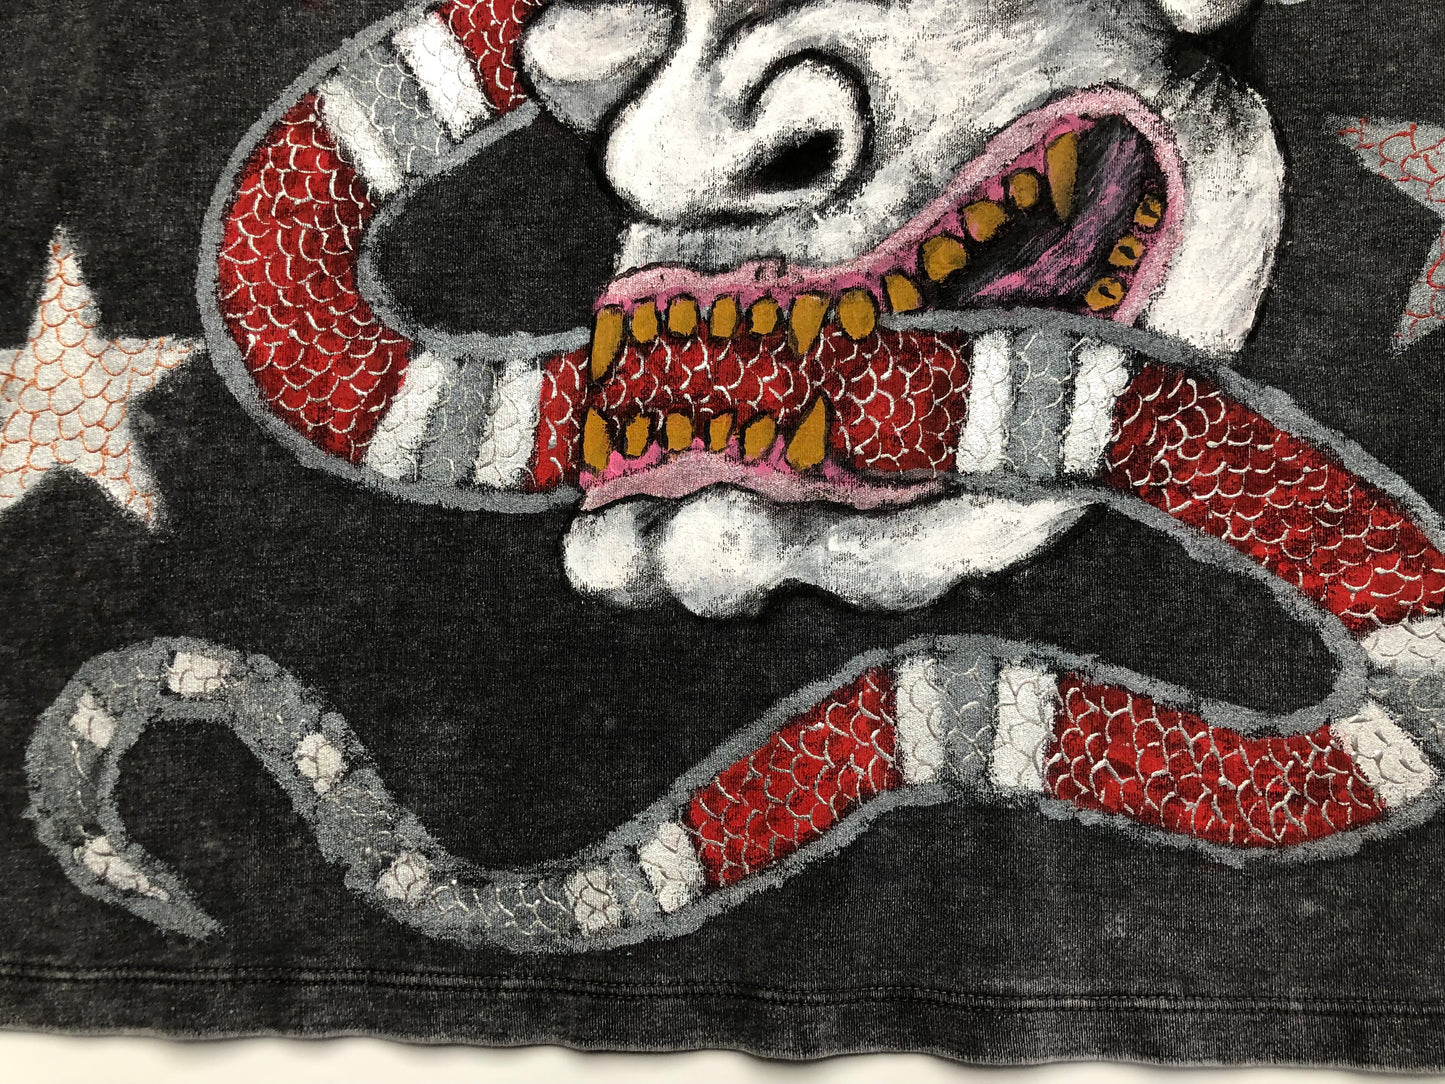 The bottom of the t-shirt with a demon and a snake